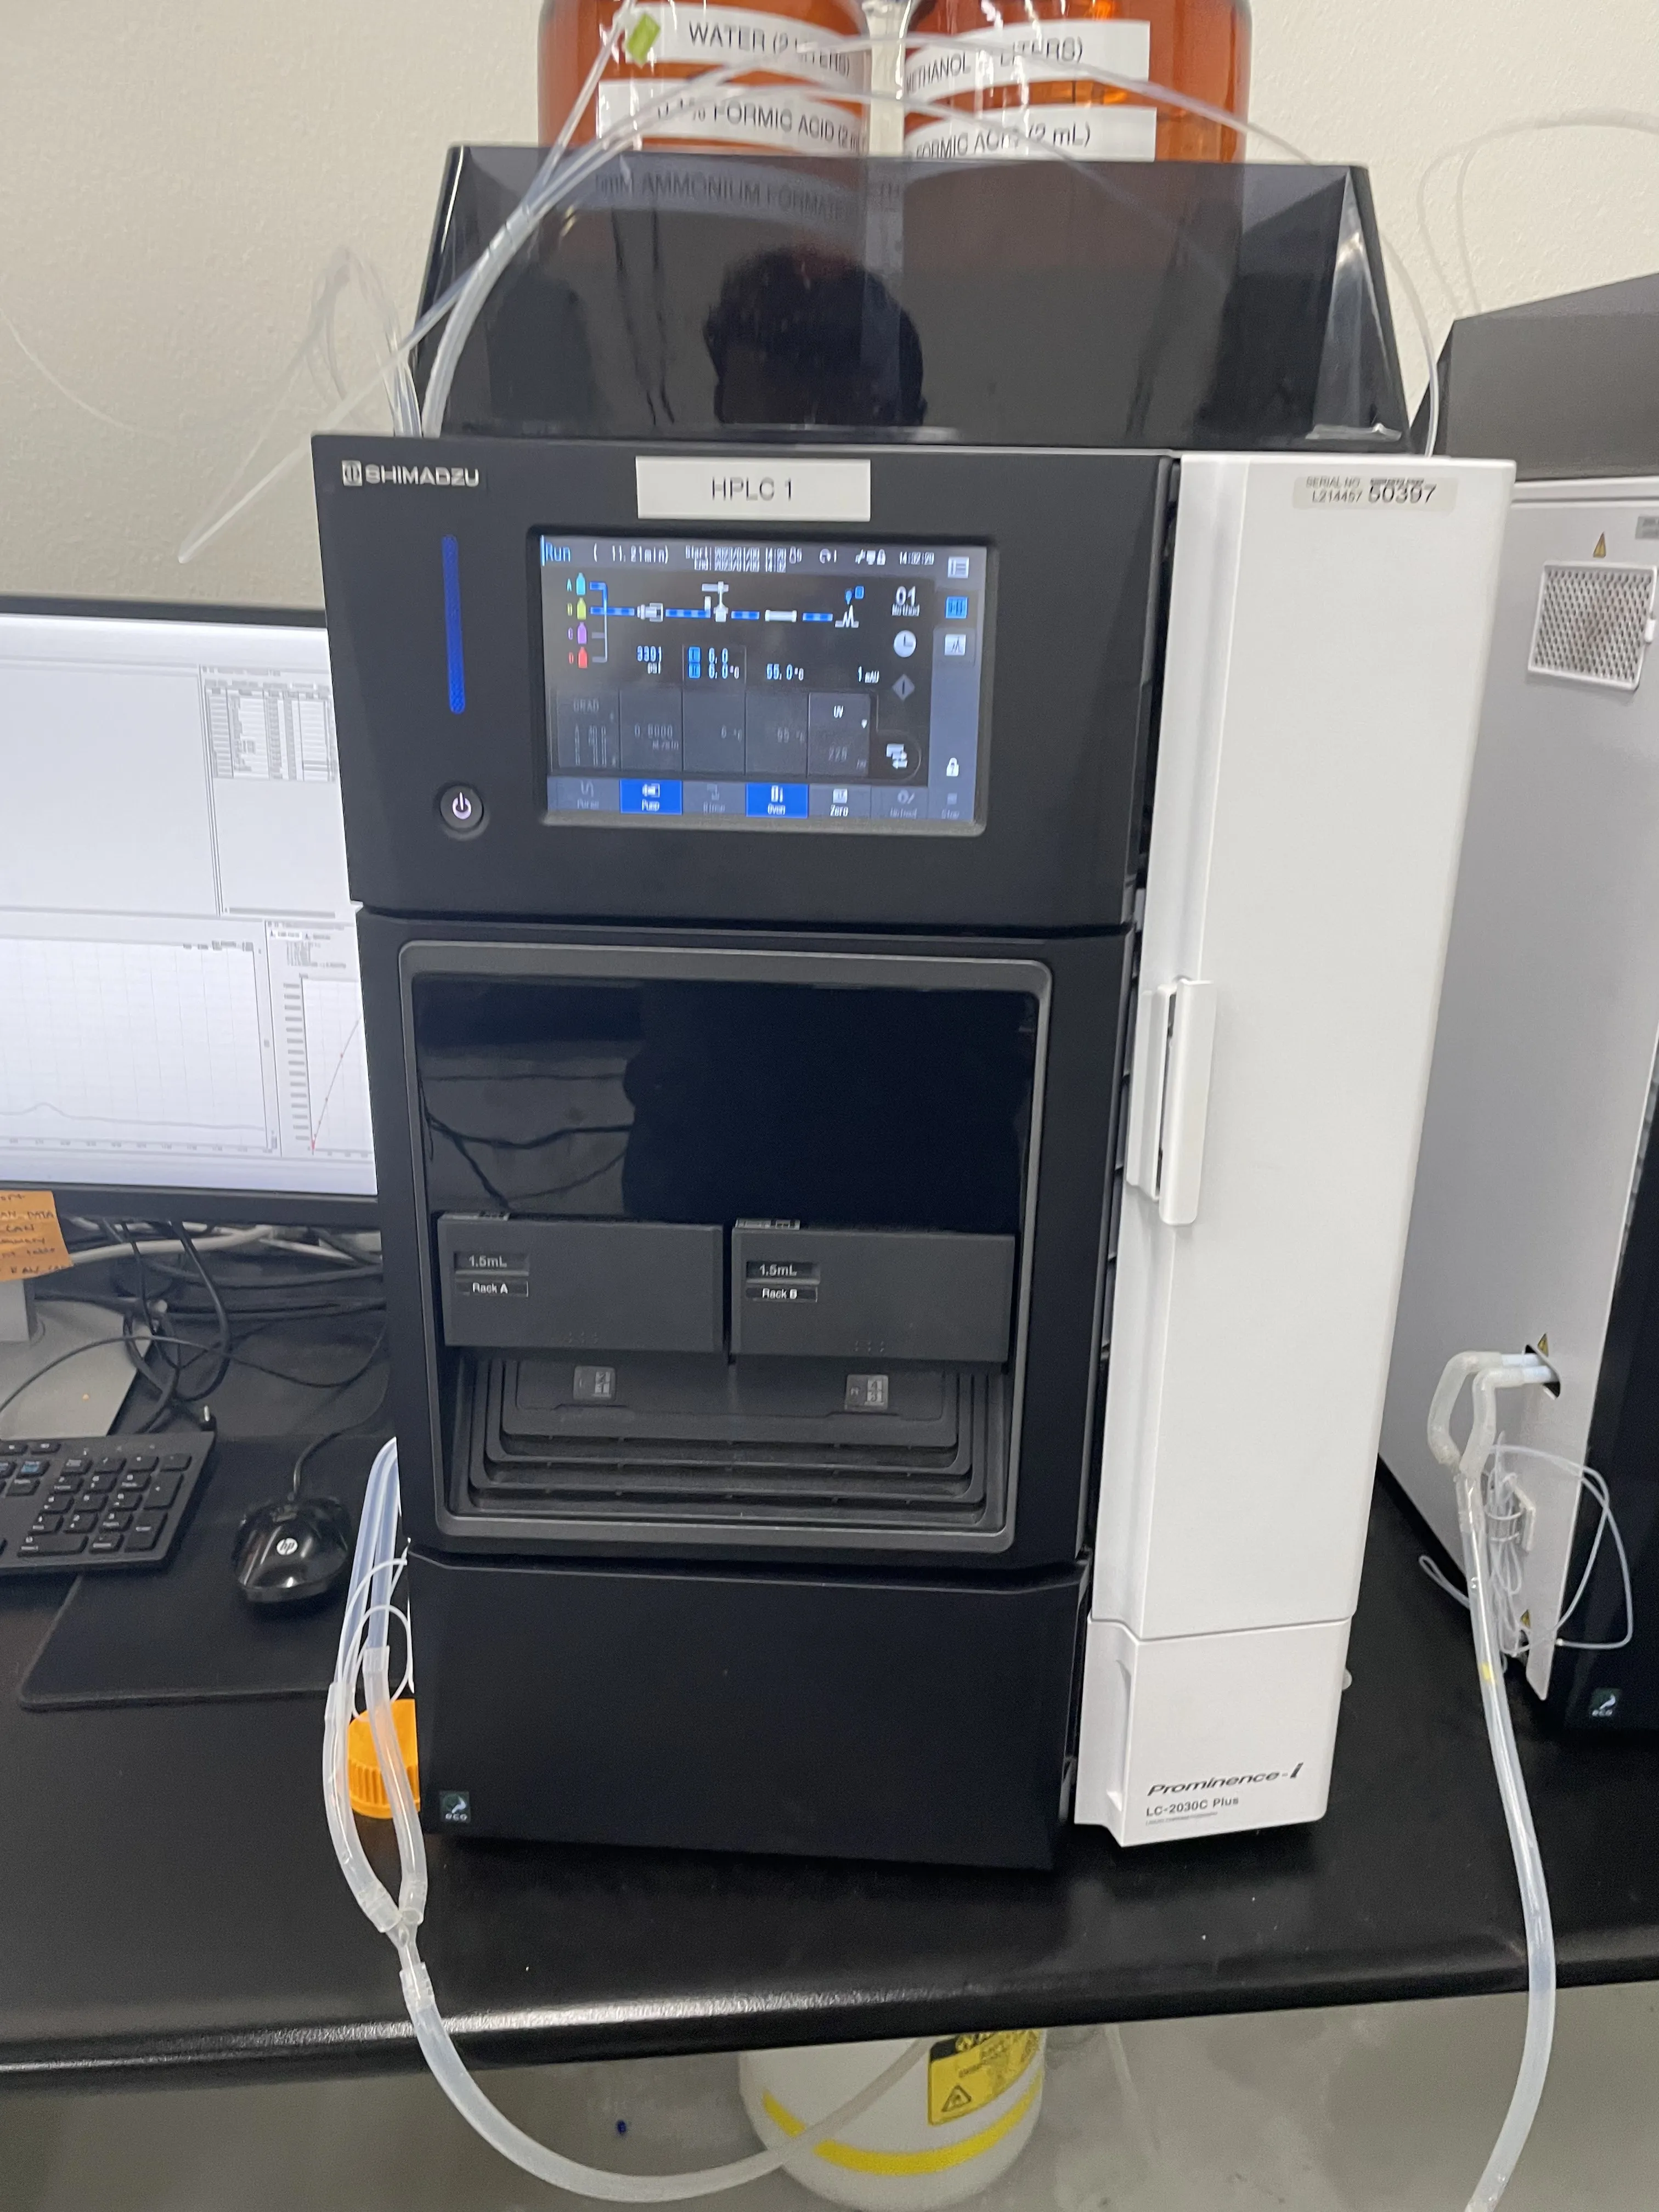 Shimadzu HPLC 2030 with Labsolutions software installed